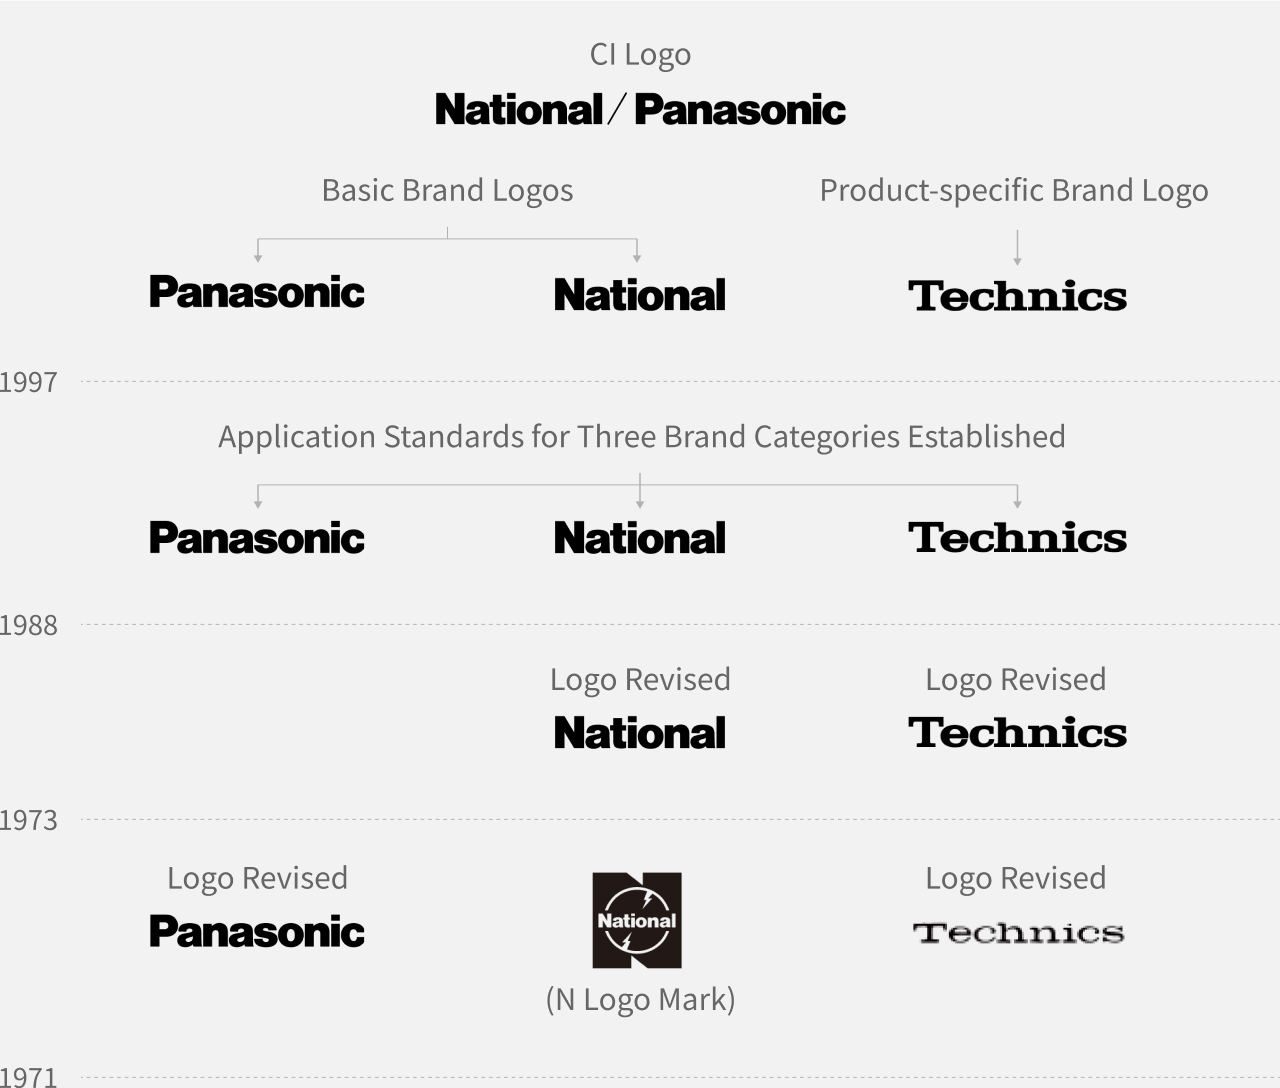 1997: "National/Panasonic" was registered as our CI mark, and "Panasonic" and "National" as our general trademarks, and "Technics" as our specific trademark. 1988: Standard for our brand use by product category was adopted as - "Panasonic," "National," and "Technics." 1973: Revision of logos -  "National," "N-Mark," and "Technics". 1971: Revision of logos - "Panasonic" and "Technics".